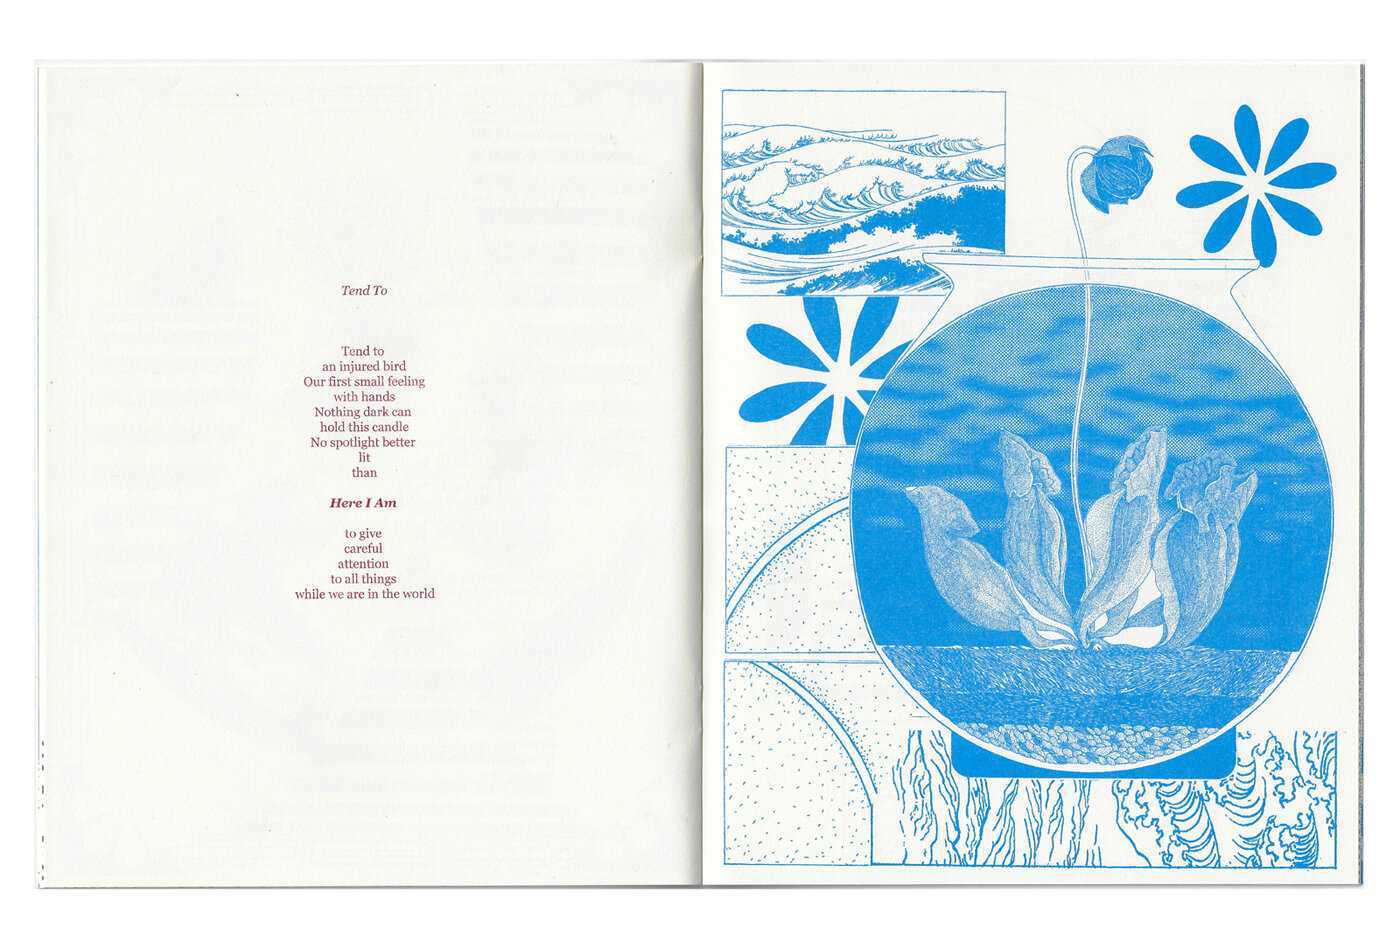  So far from the water and thirsty   Collaboration with Brooke Manning   24 pages, saddle stitched, risograph printed   edition of 200, first edition 2018  edition of 200, second edition 2020 